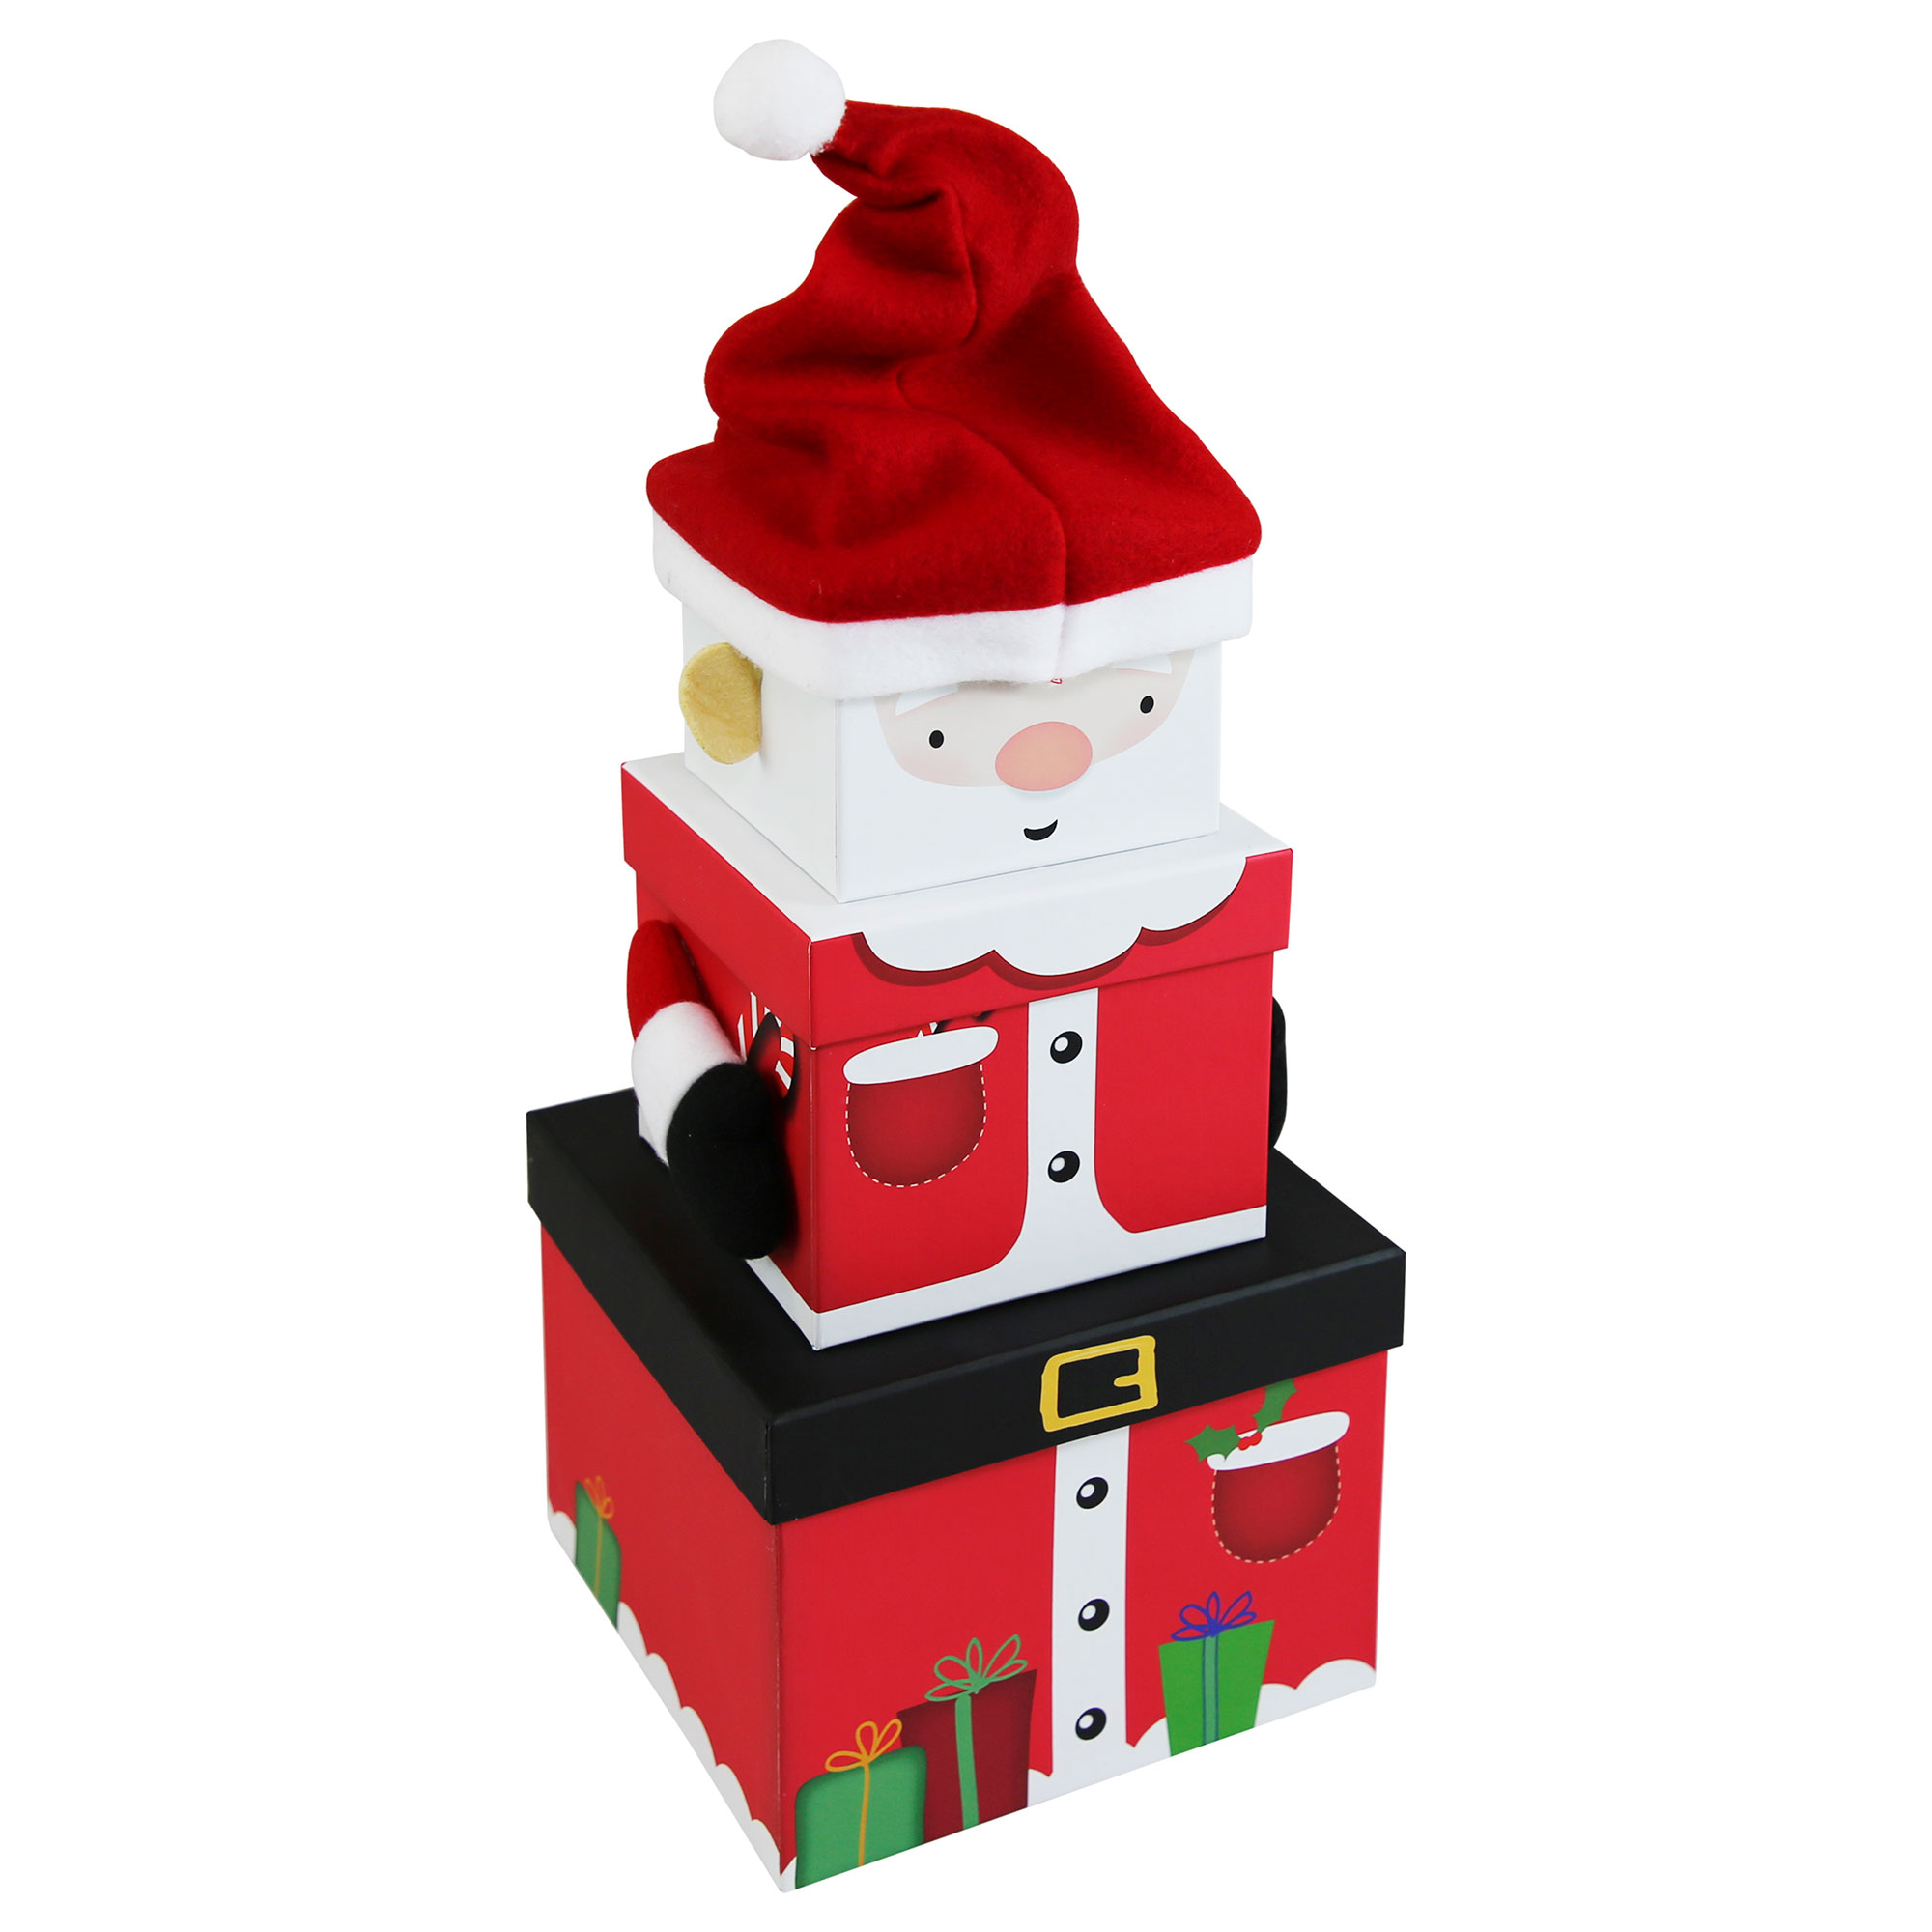 Buy Stackable Plush Santa Gift Boxes - Set of 3 for GBP 6.99 | Card ...